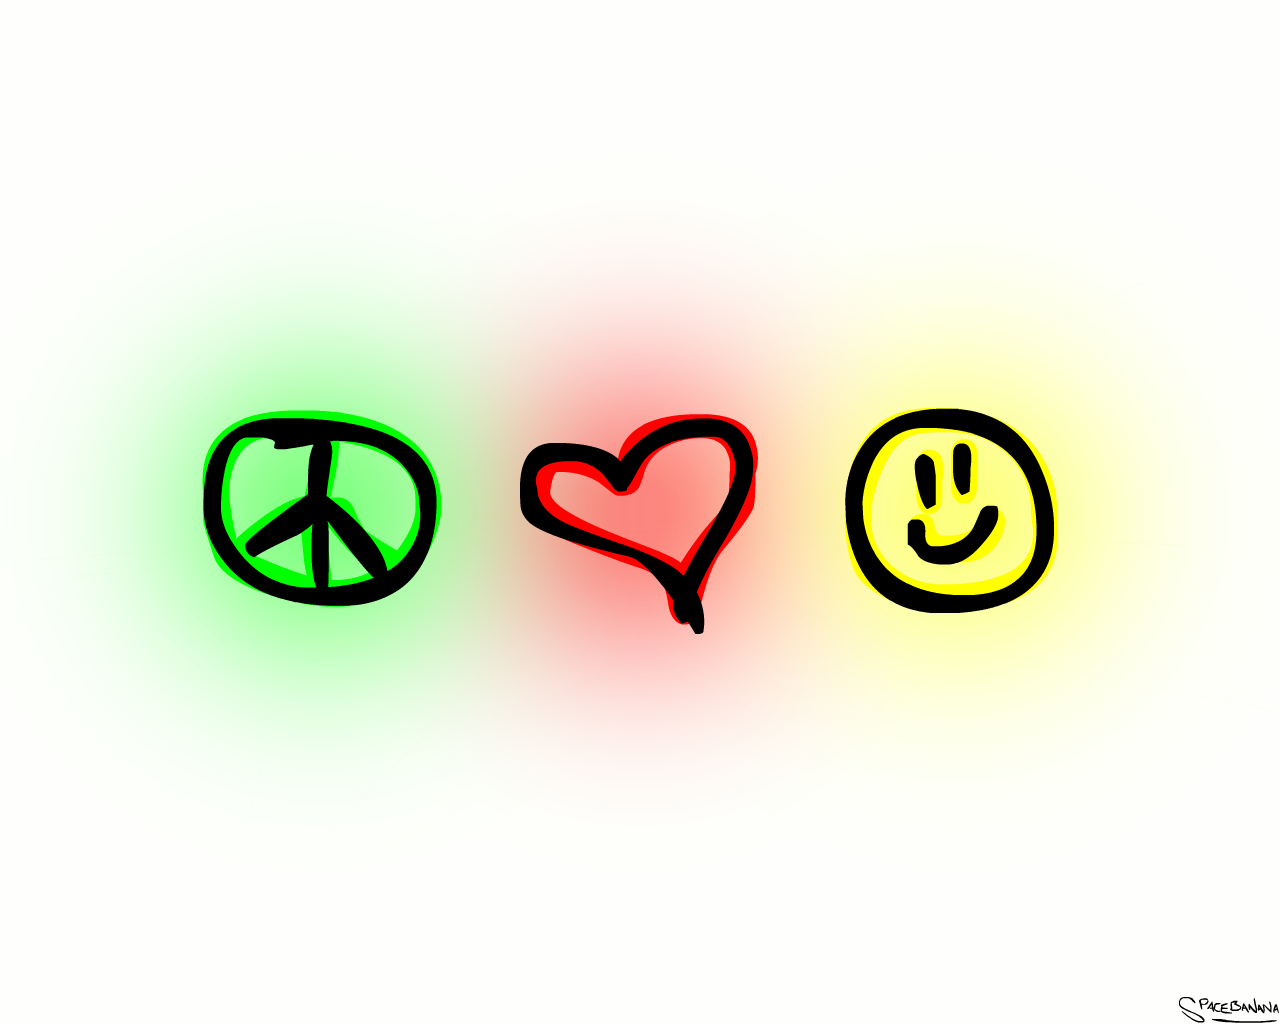 peace-love-and-happiness-peace-love-and-happiness-27065553-1280-1024.png